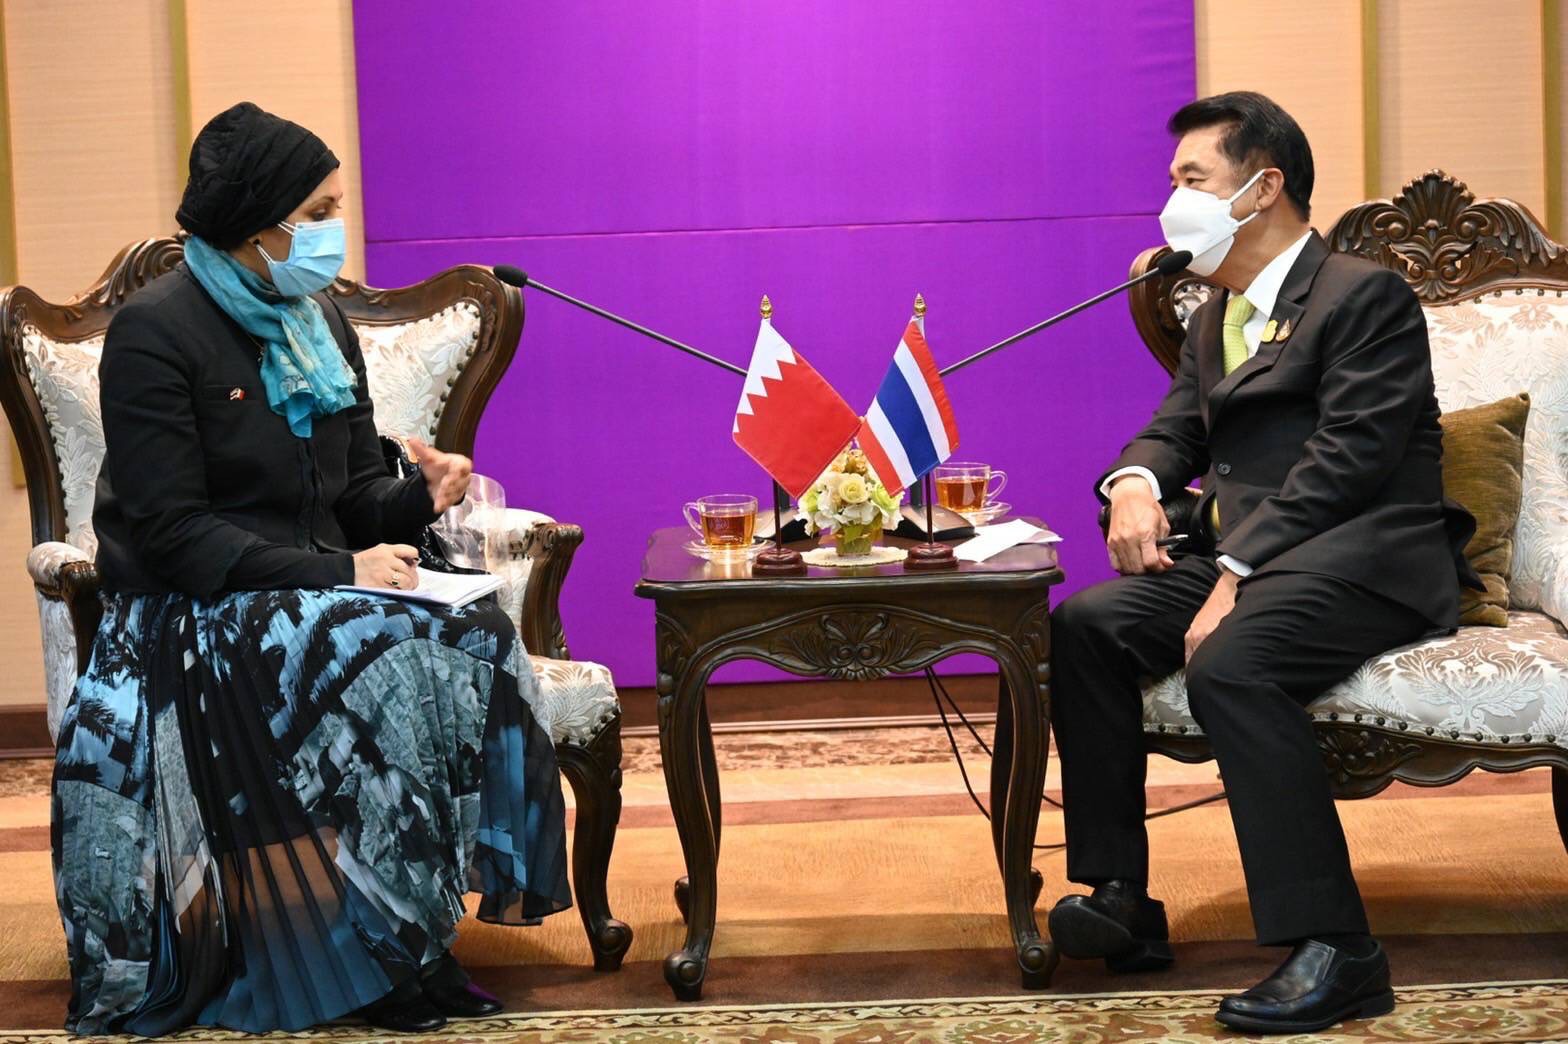 The Minister of Industry Welcomed the Ambassador of the Kingdom of Bahrain to Thailand and her Delegation